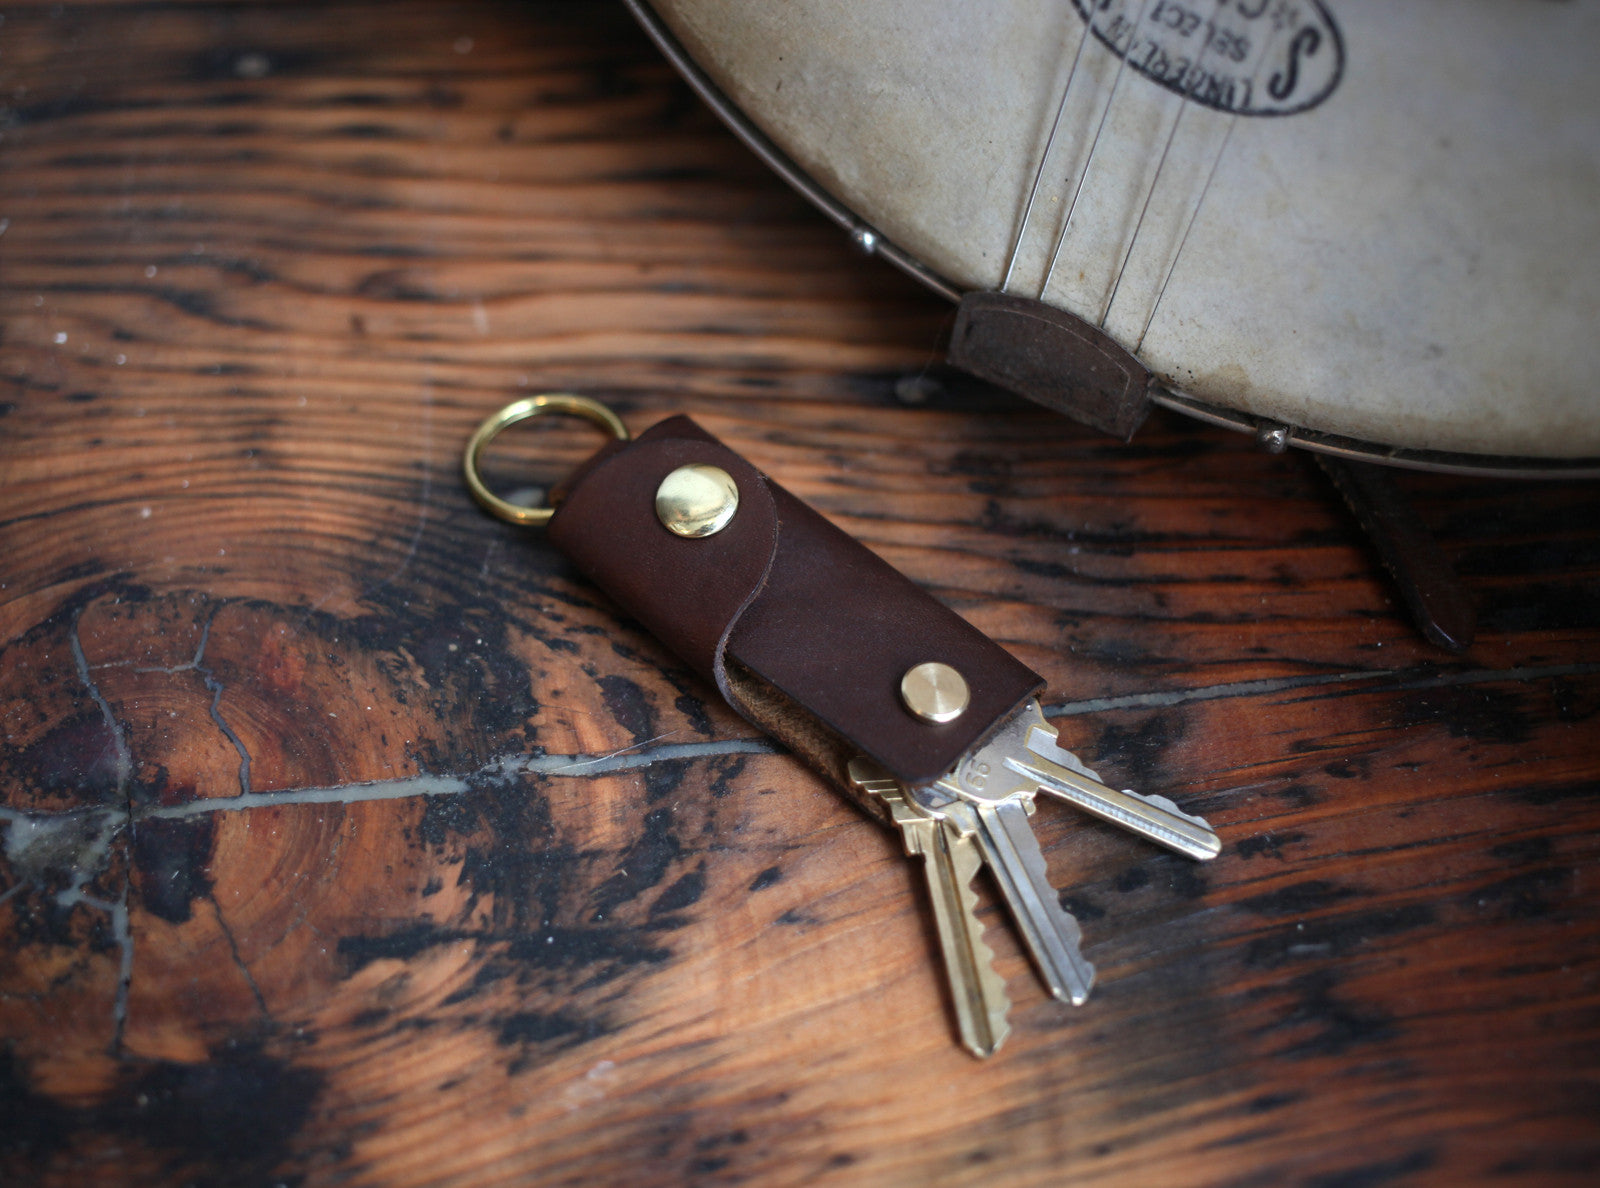 Cassapora Howdy, Leather Wristlet Strap, Leather Key Chain Clip, Holds 3+ Key Rings, Clip Your Keys to Almost Anything! Laser Engraved, Made to Order